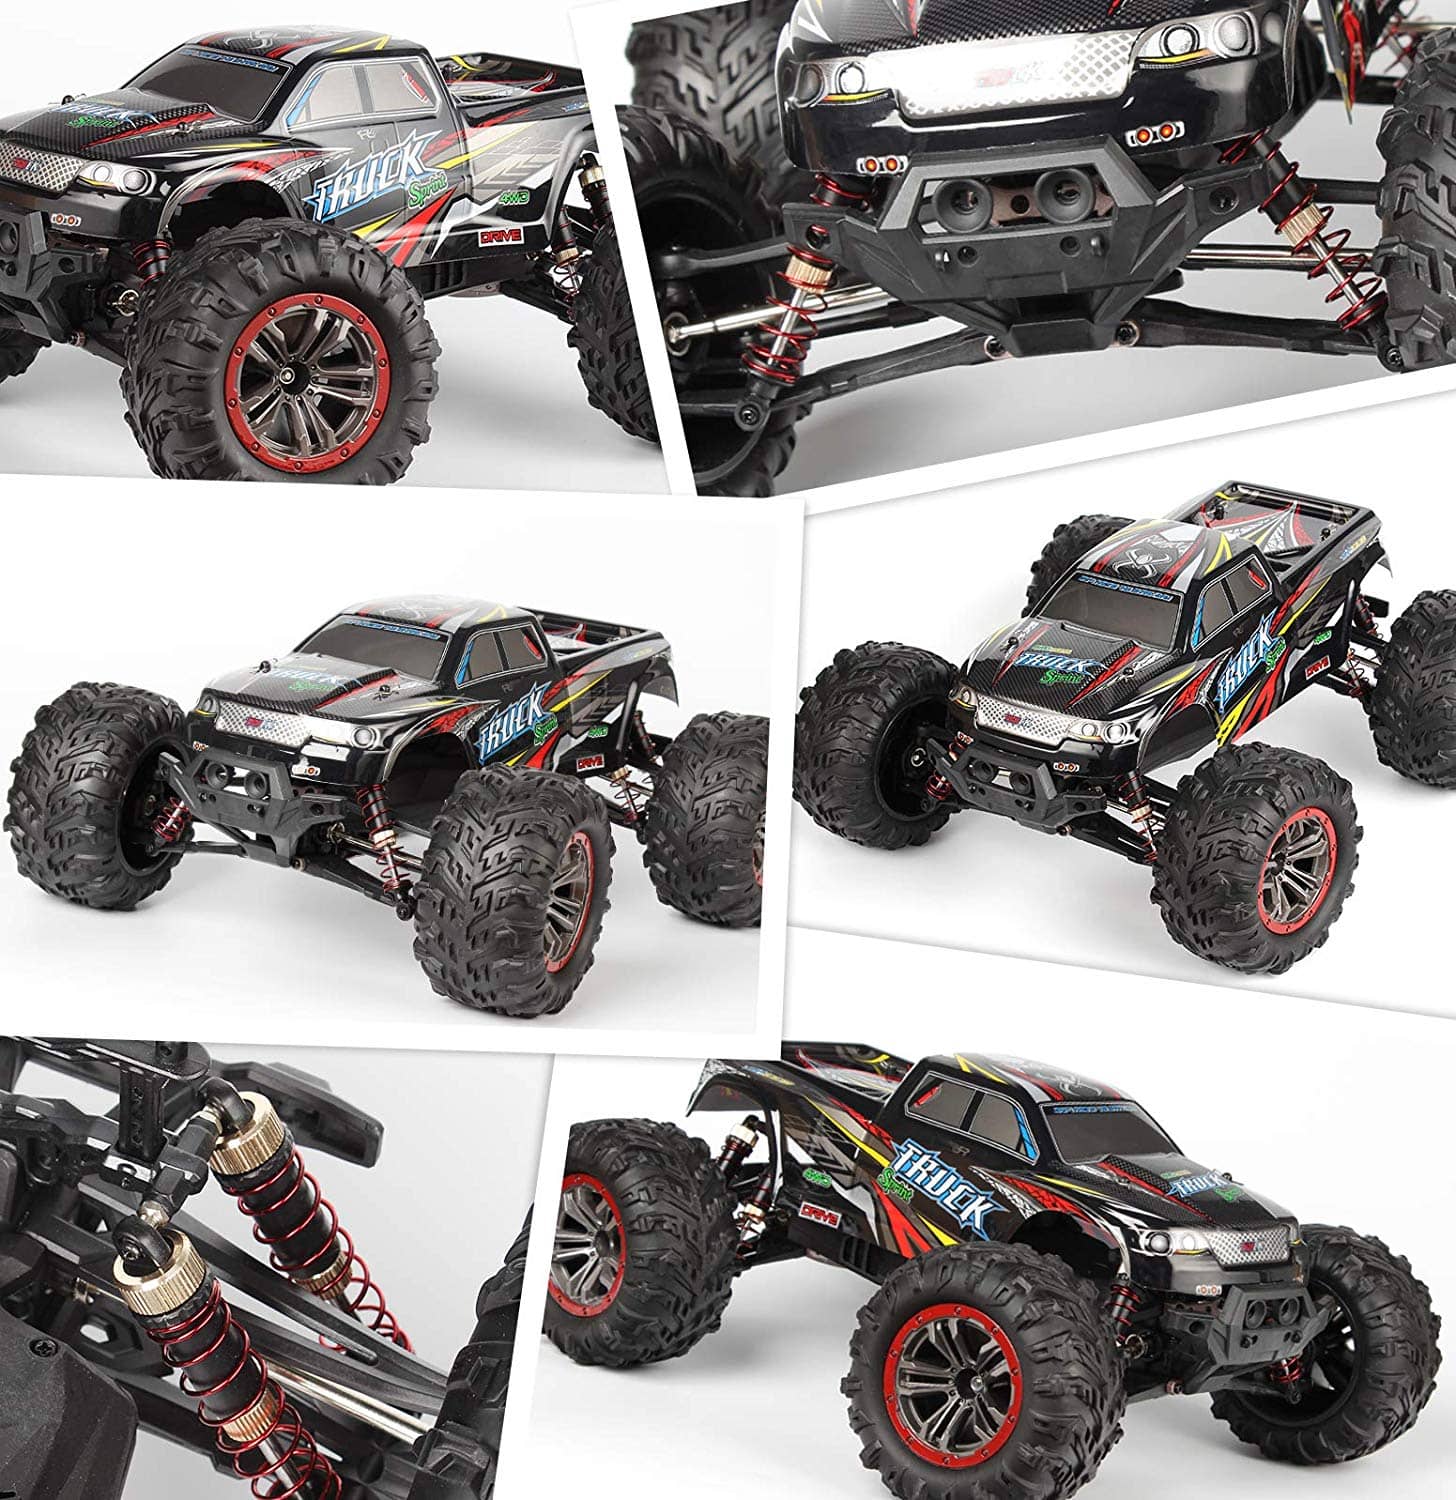 Hosim 1/10 Scale Upgraded 9125 RC Car Monster Truck with Oil Shock + 2 Batteries